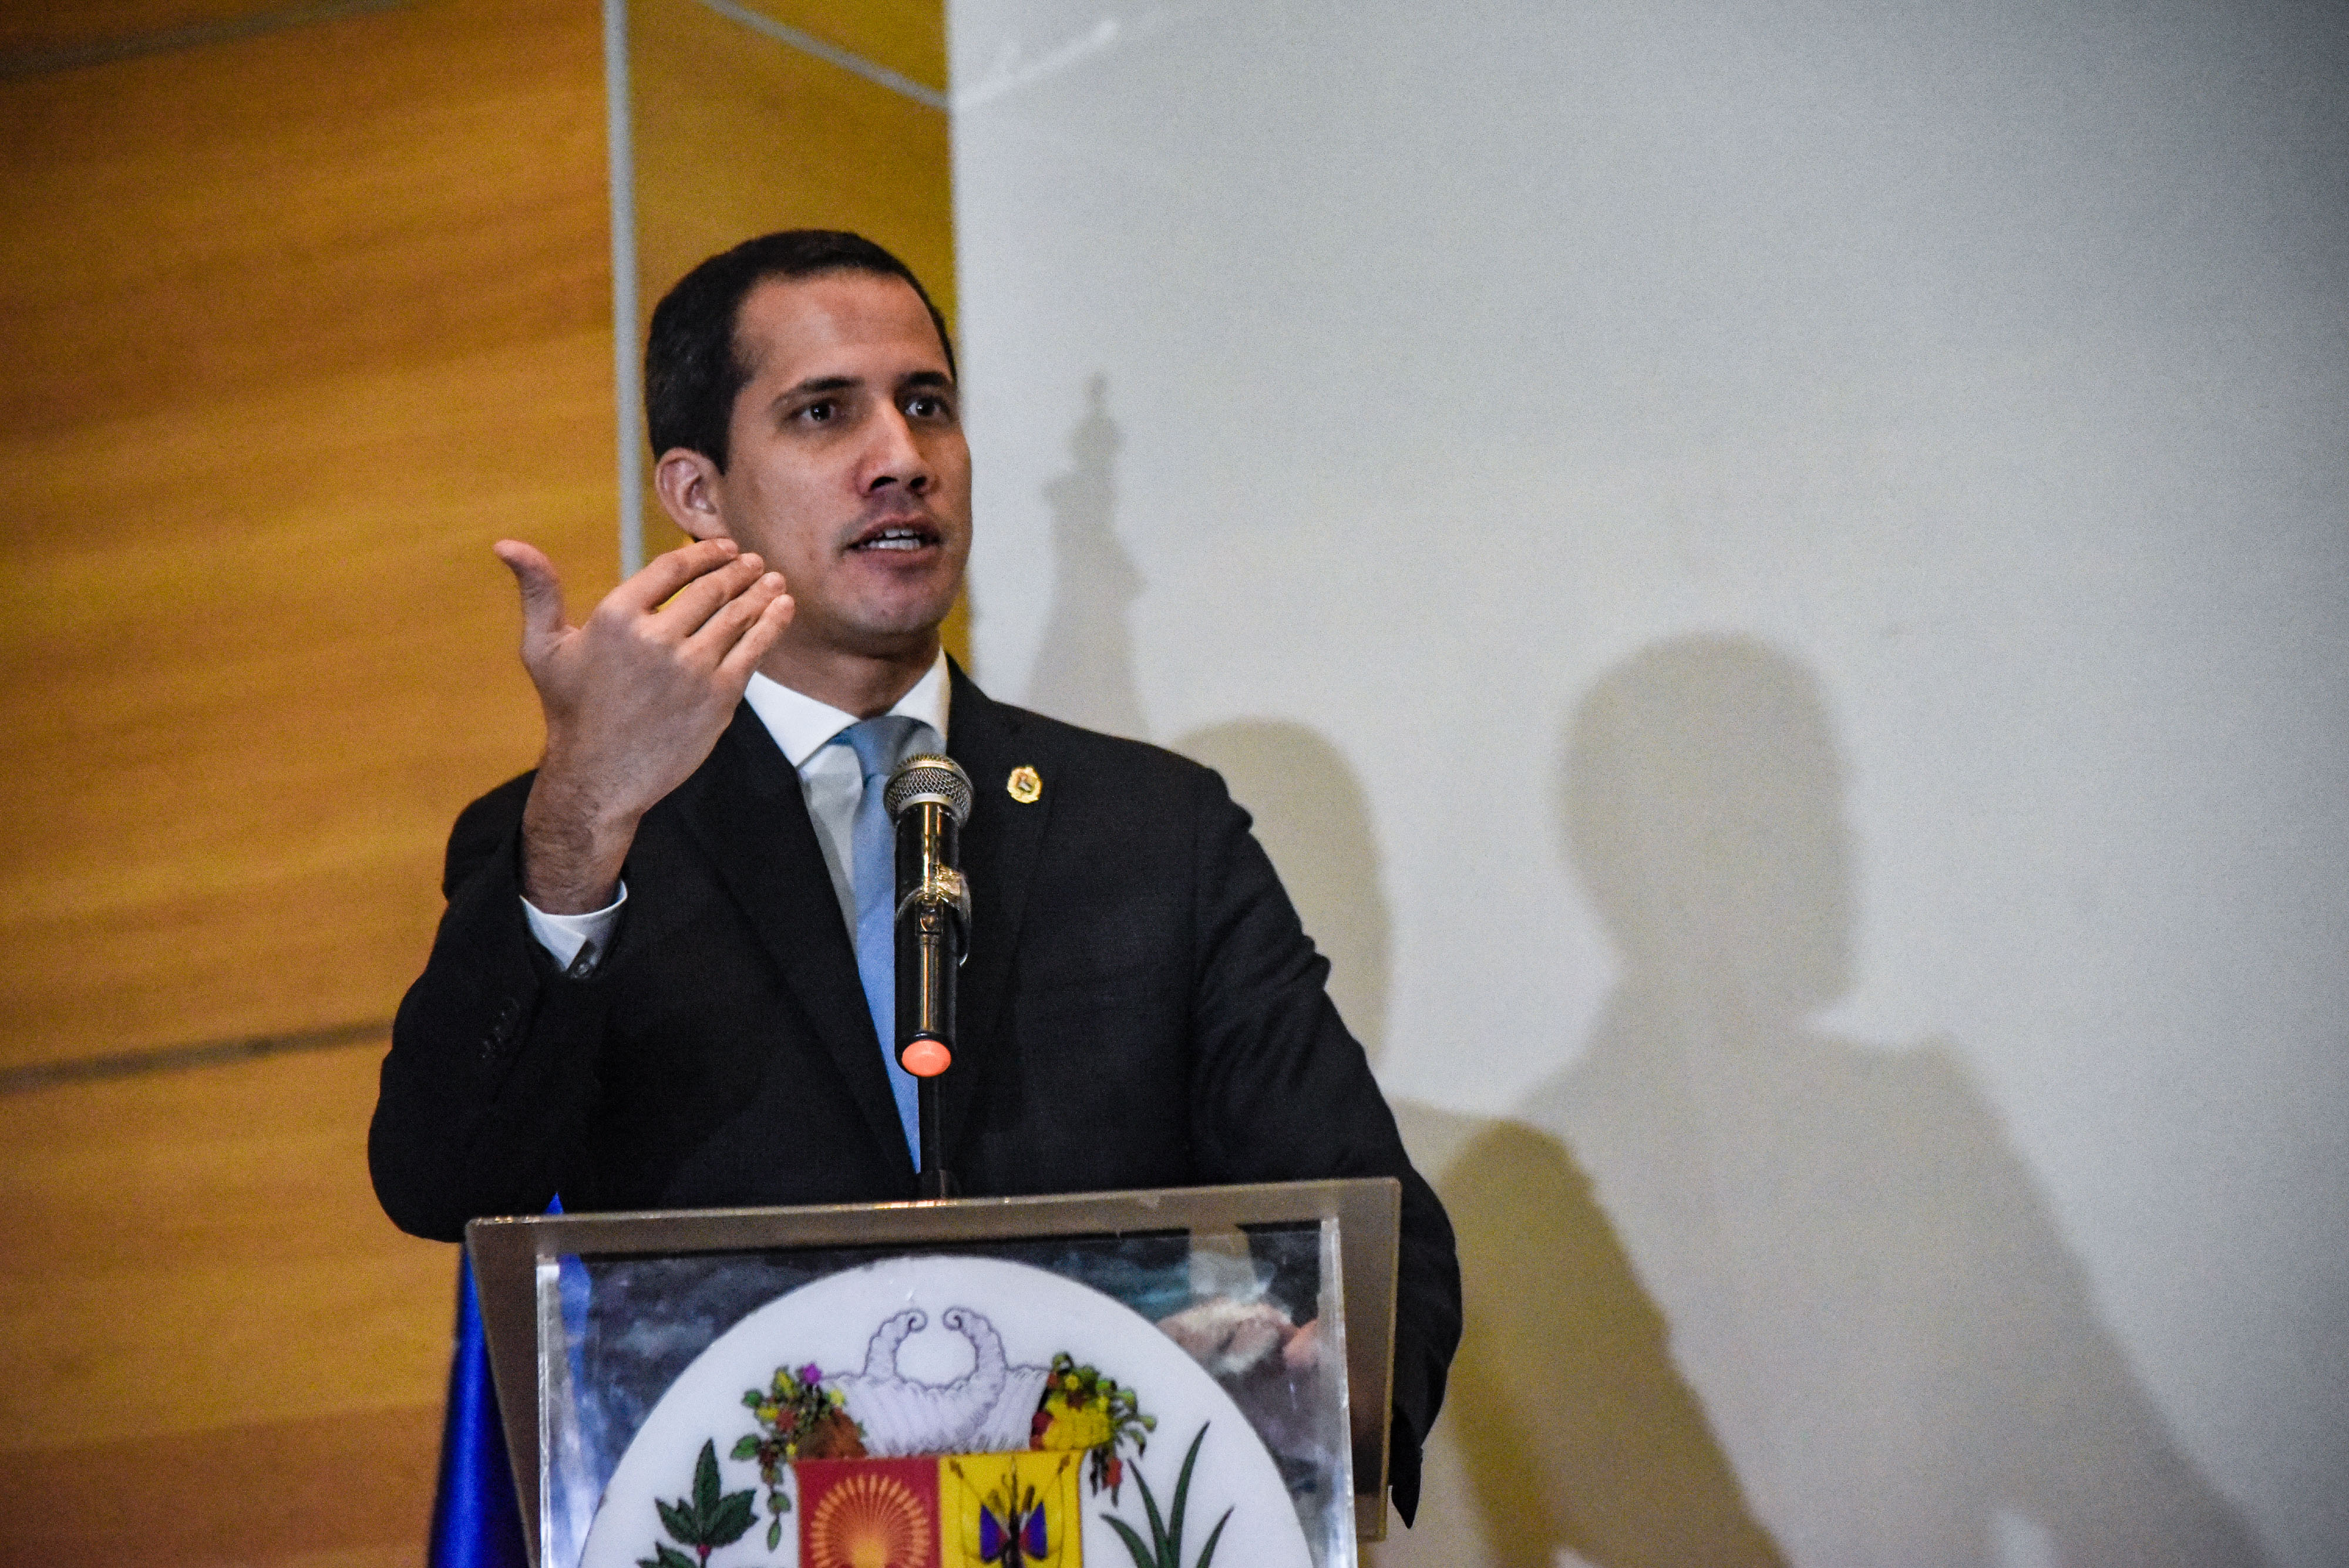 CARACAS, VENEZUELA - FEBRUARY 15: Opposition leader and and reelected president of the National Assembly by anti-Maduro lawmakers majority Juan Guaido speaks during a press conference regarding his International Tour at Centro Letonia on February 15, 2020 in Caracas, Venezuela. Guaido arrived to Venezuela on February 11 amid a chaotic scene at Maiquetia Airport where Pro-Maduro supporters clashed with opposition lawmakers. Guaido travelled to Colombia, Europe, Canada and United States to gain international support for his effort to oust President Nicolas Maduro. (Photo by Carolina Cabral/Getty Images)